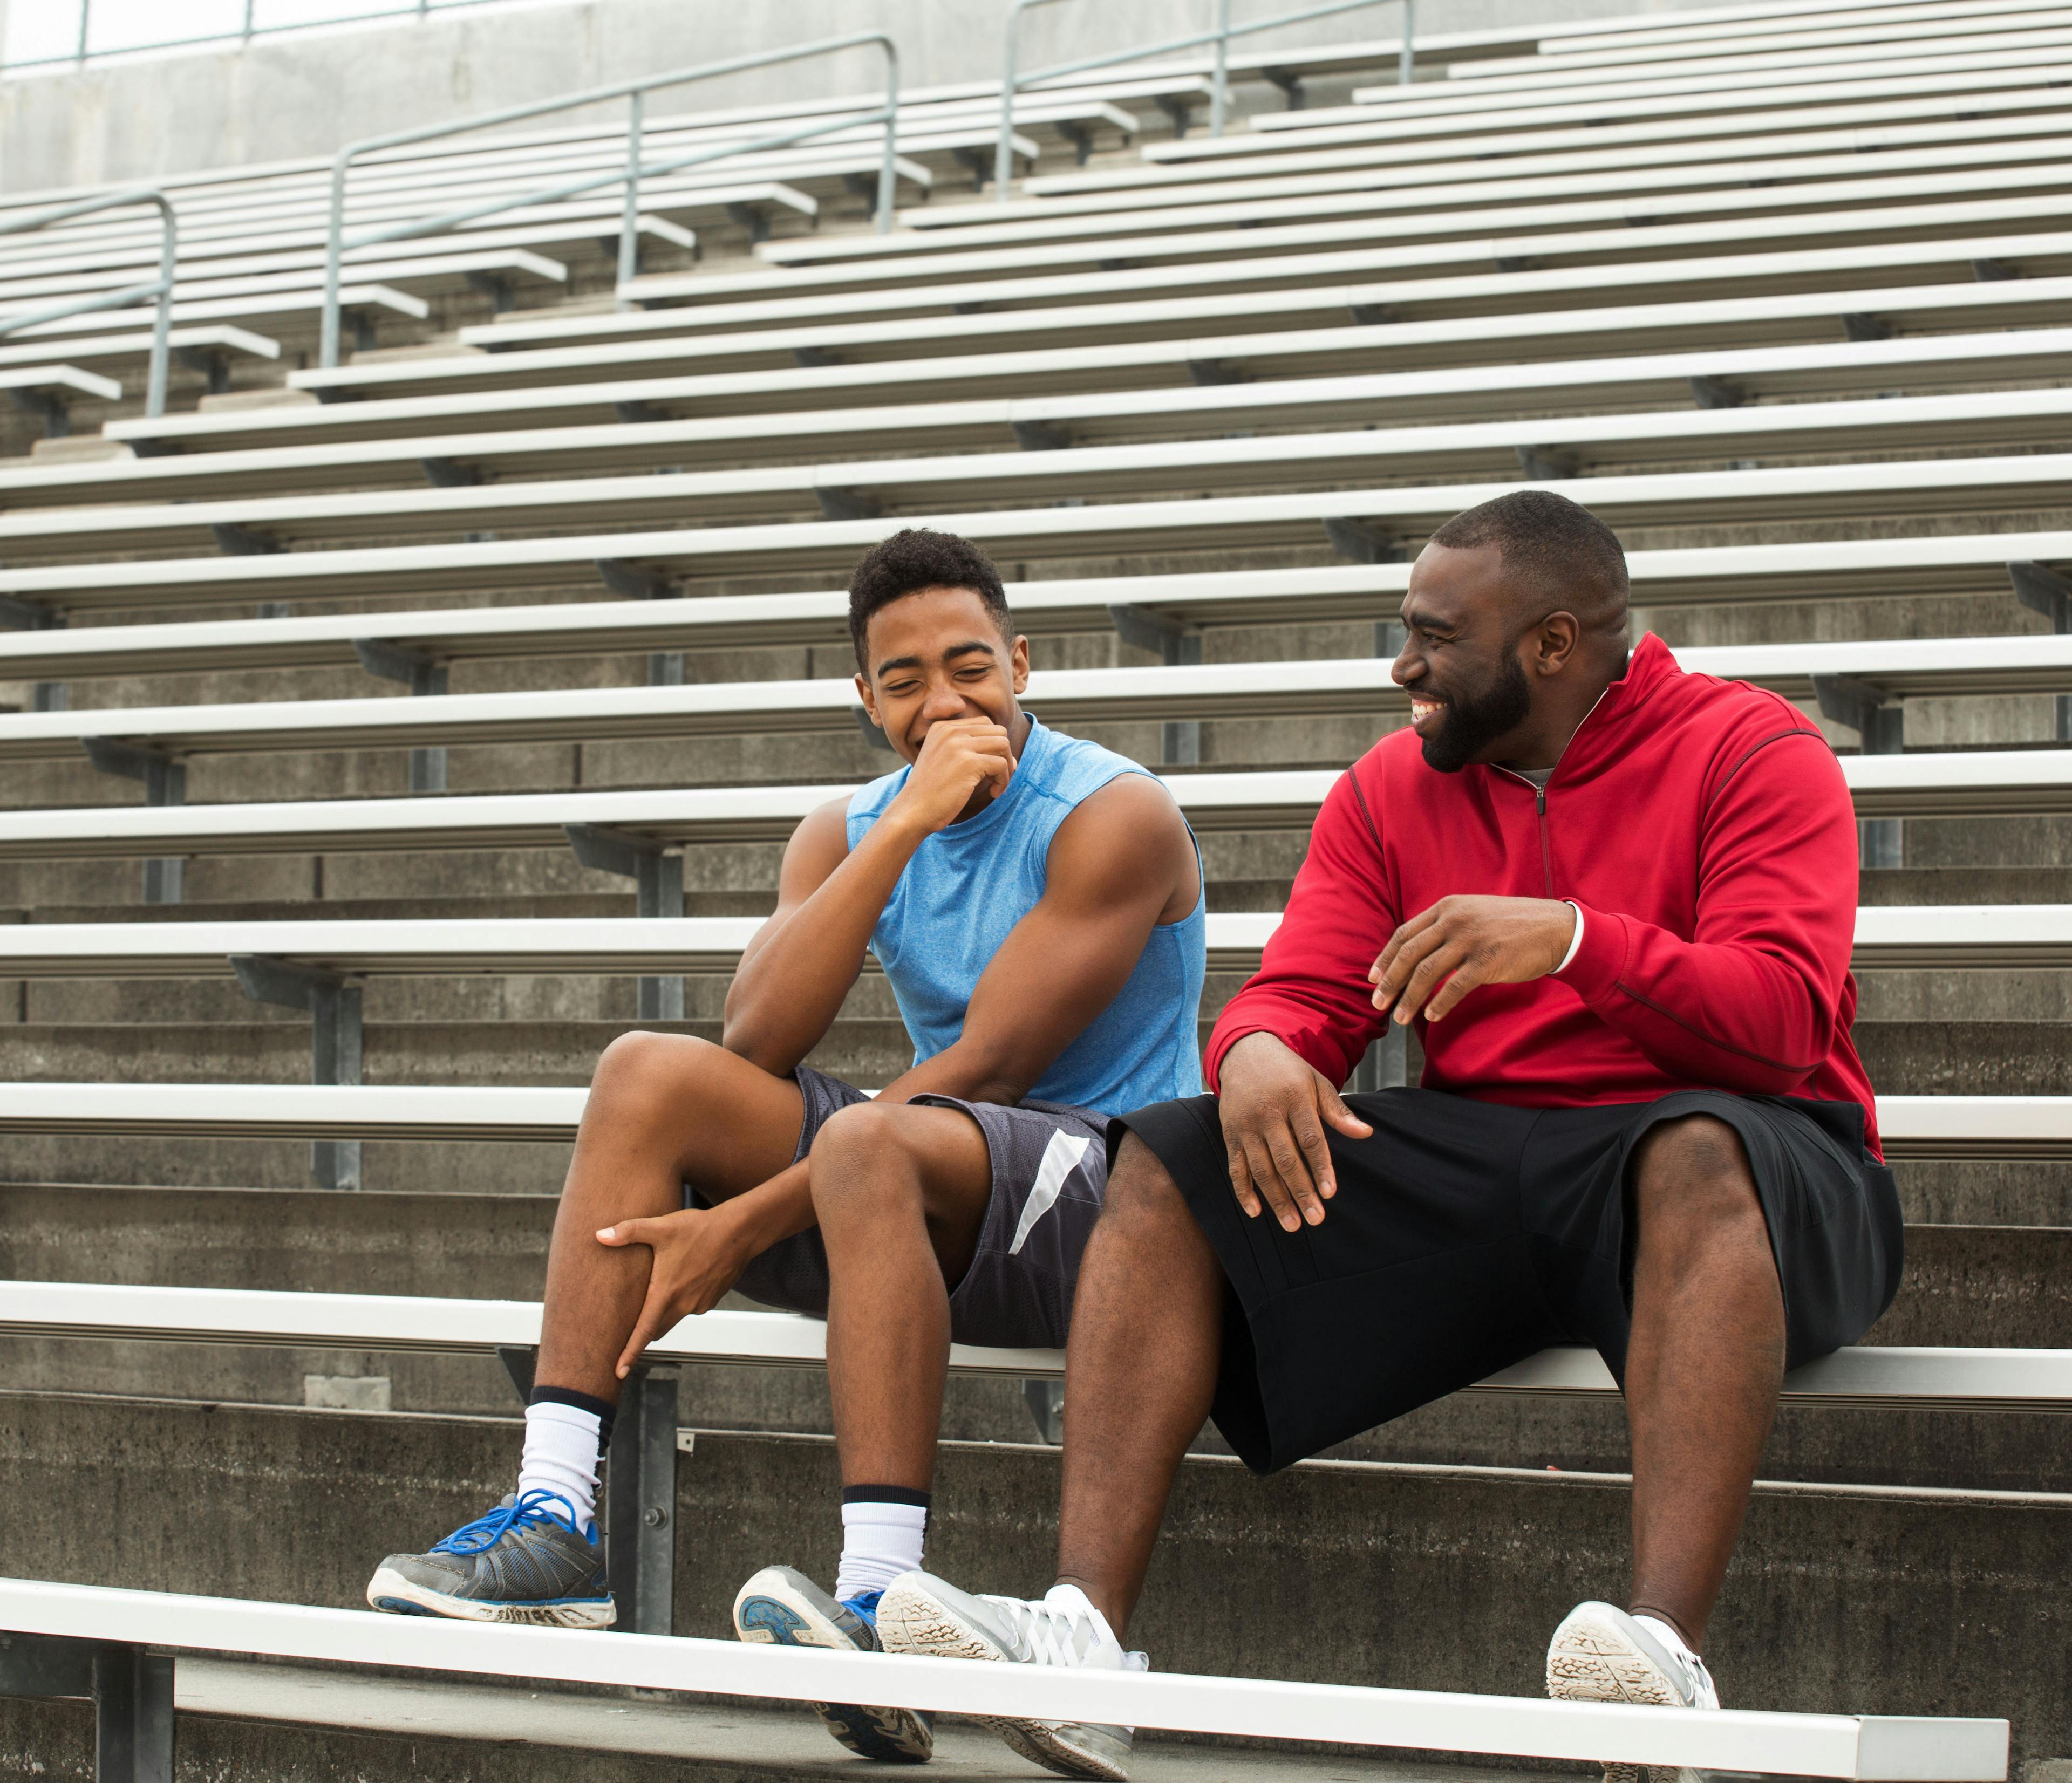 An adult man sitting with young male on the bleachers